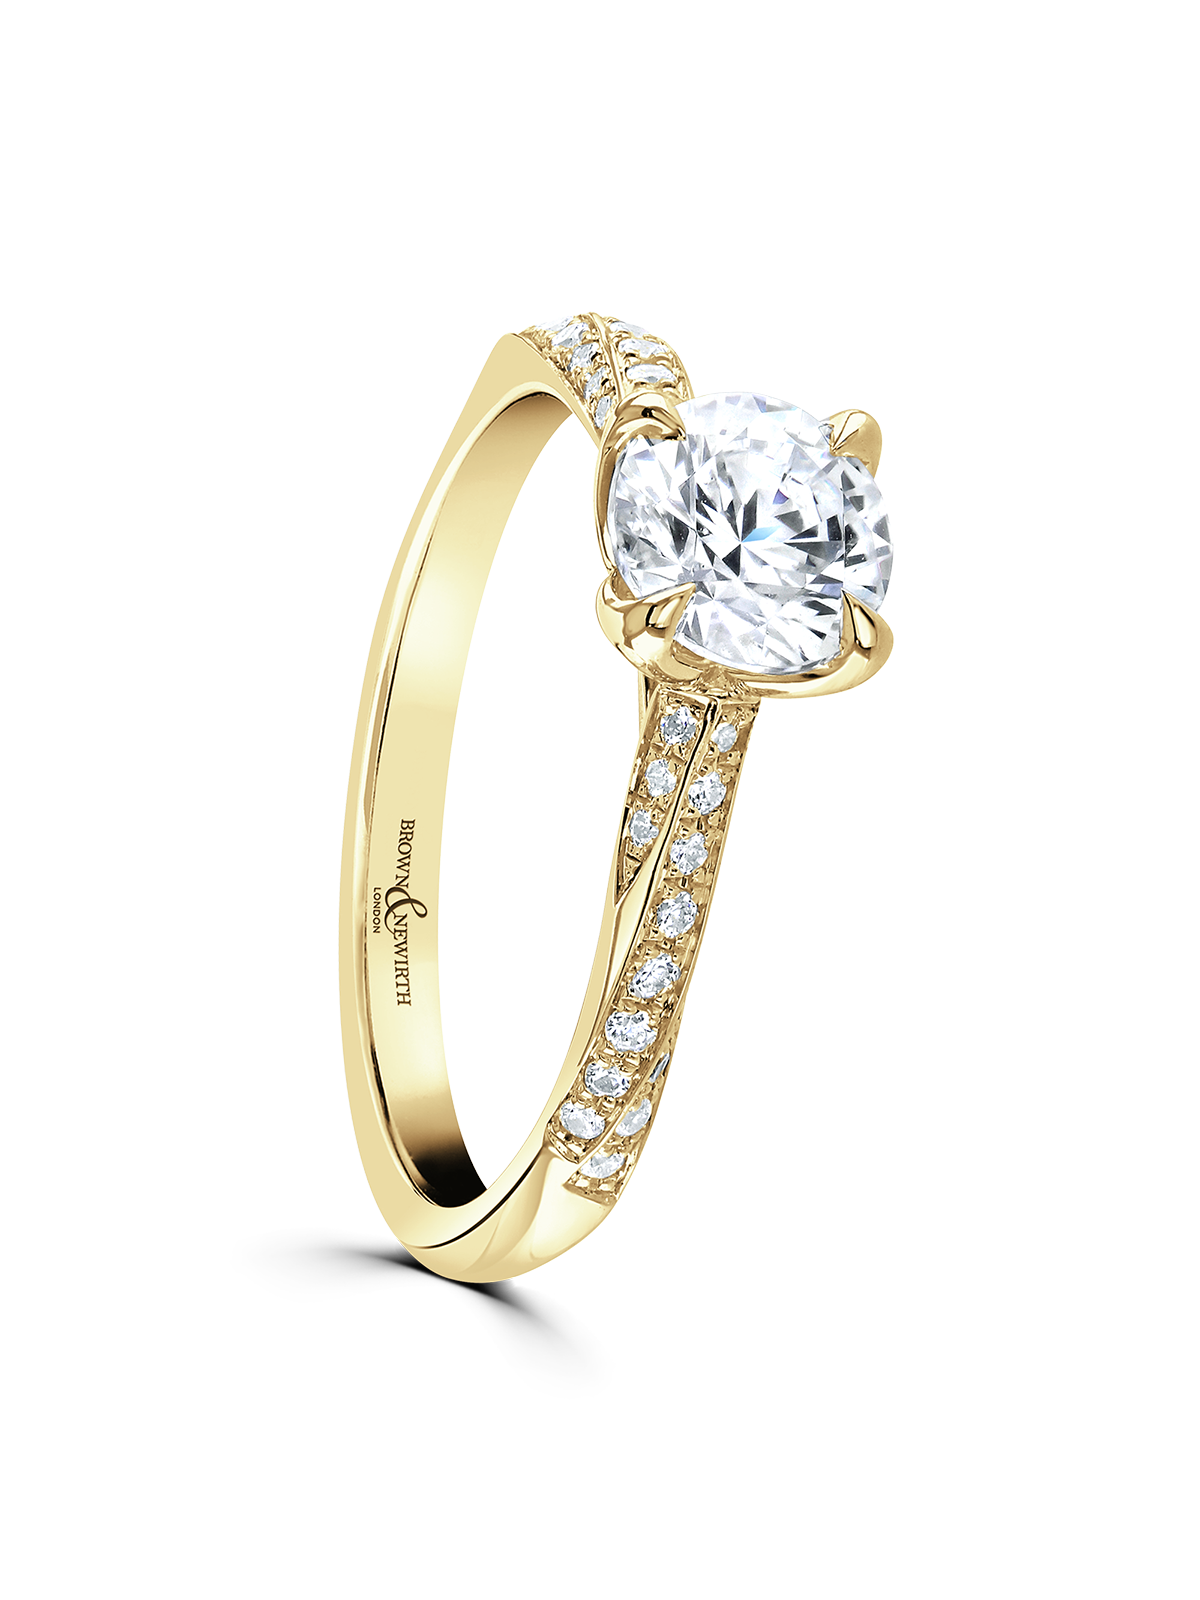 Brown & Newirth Azalea 0.50ct Brilliant Cut Certificated Diamond Solitaire Engagement Ring in 18ct Yellow Gold with Diamond Set Shoulders